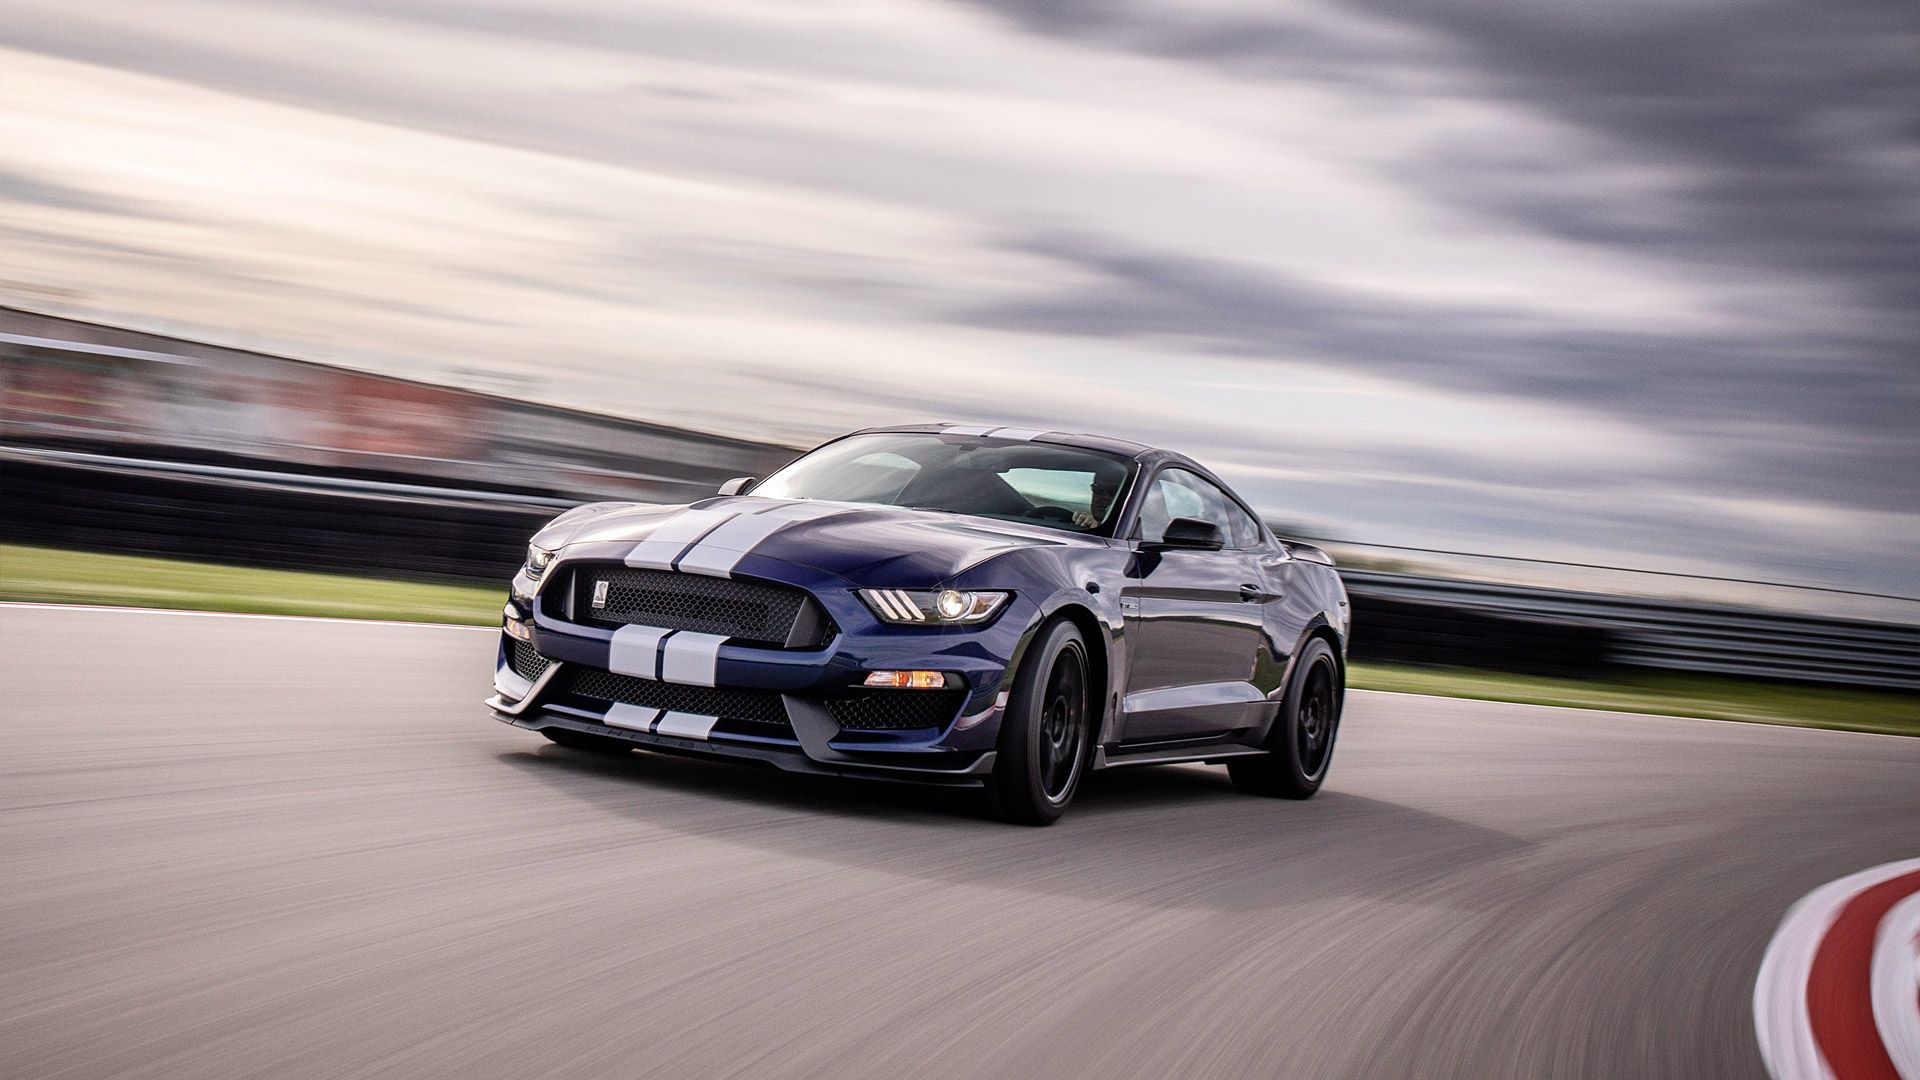 Ford Shelby Fp350S Mustang Wallpapers